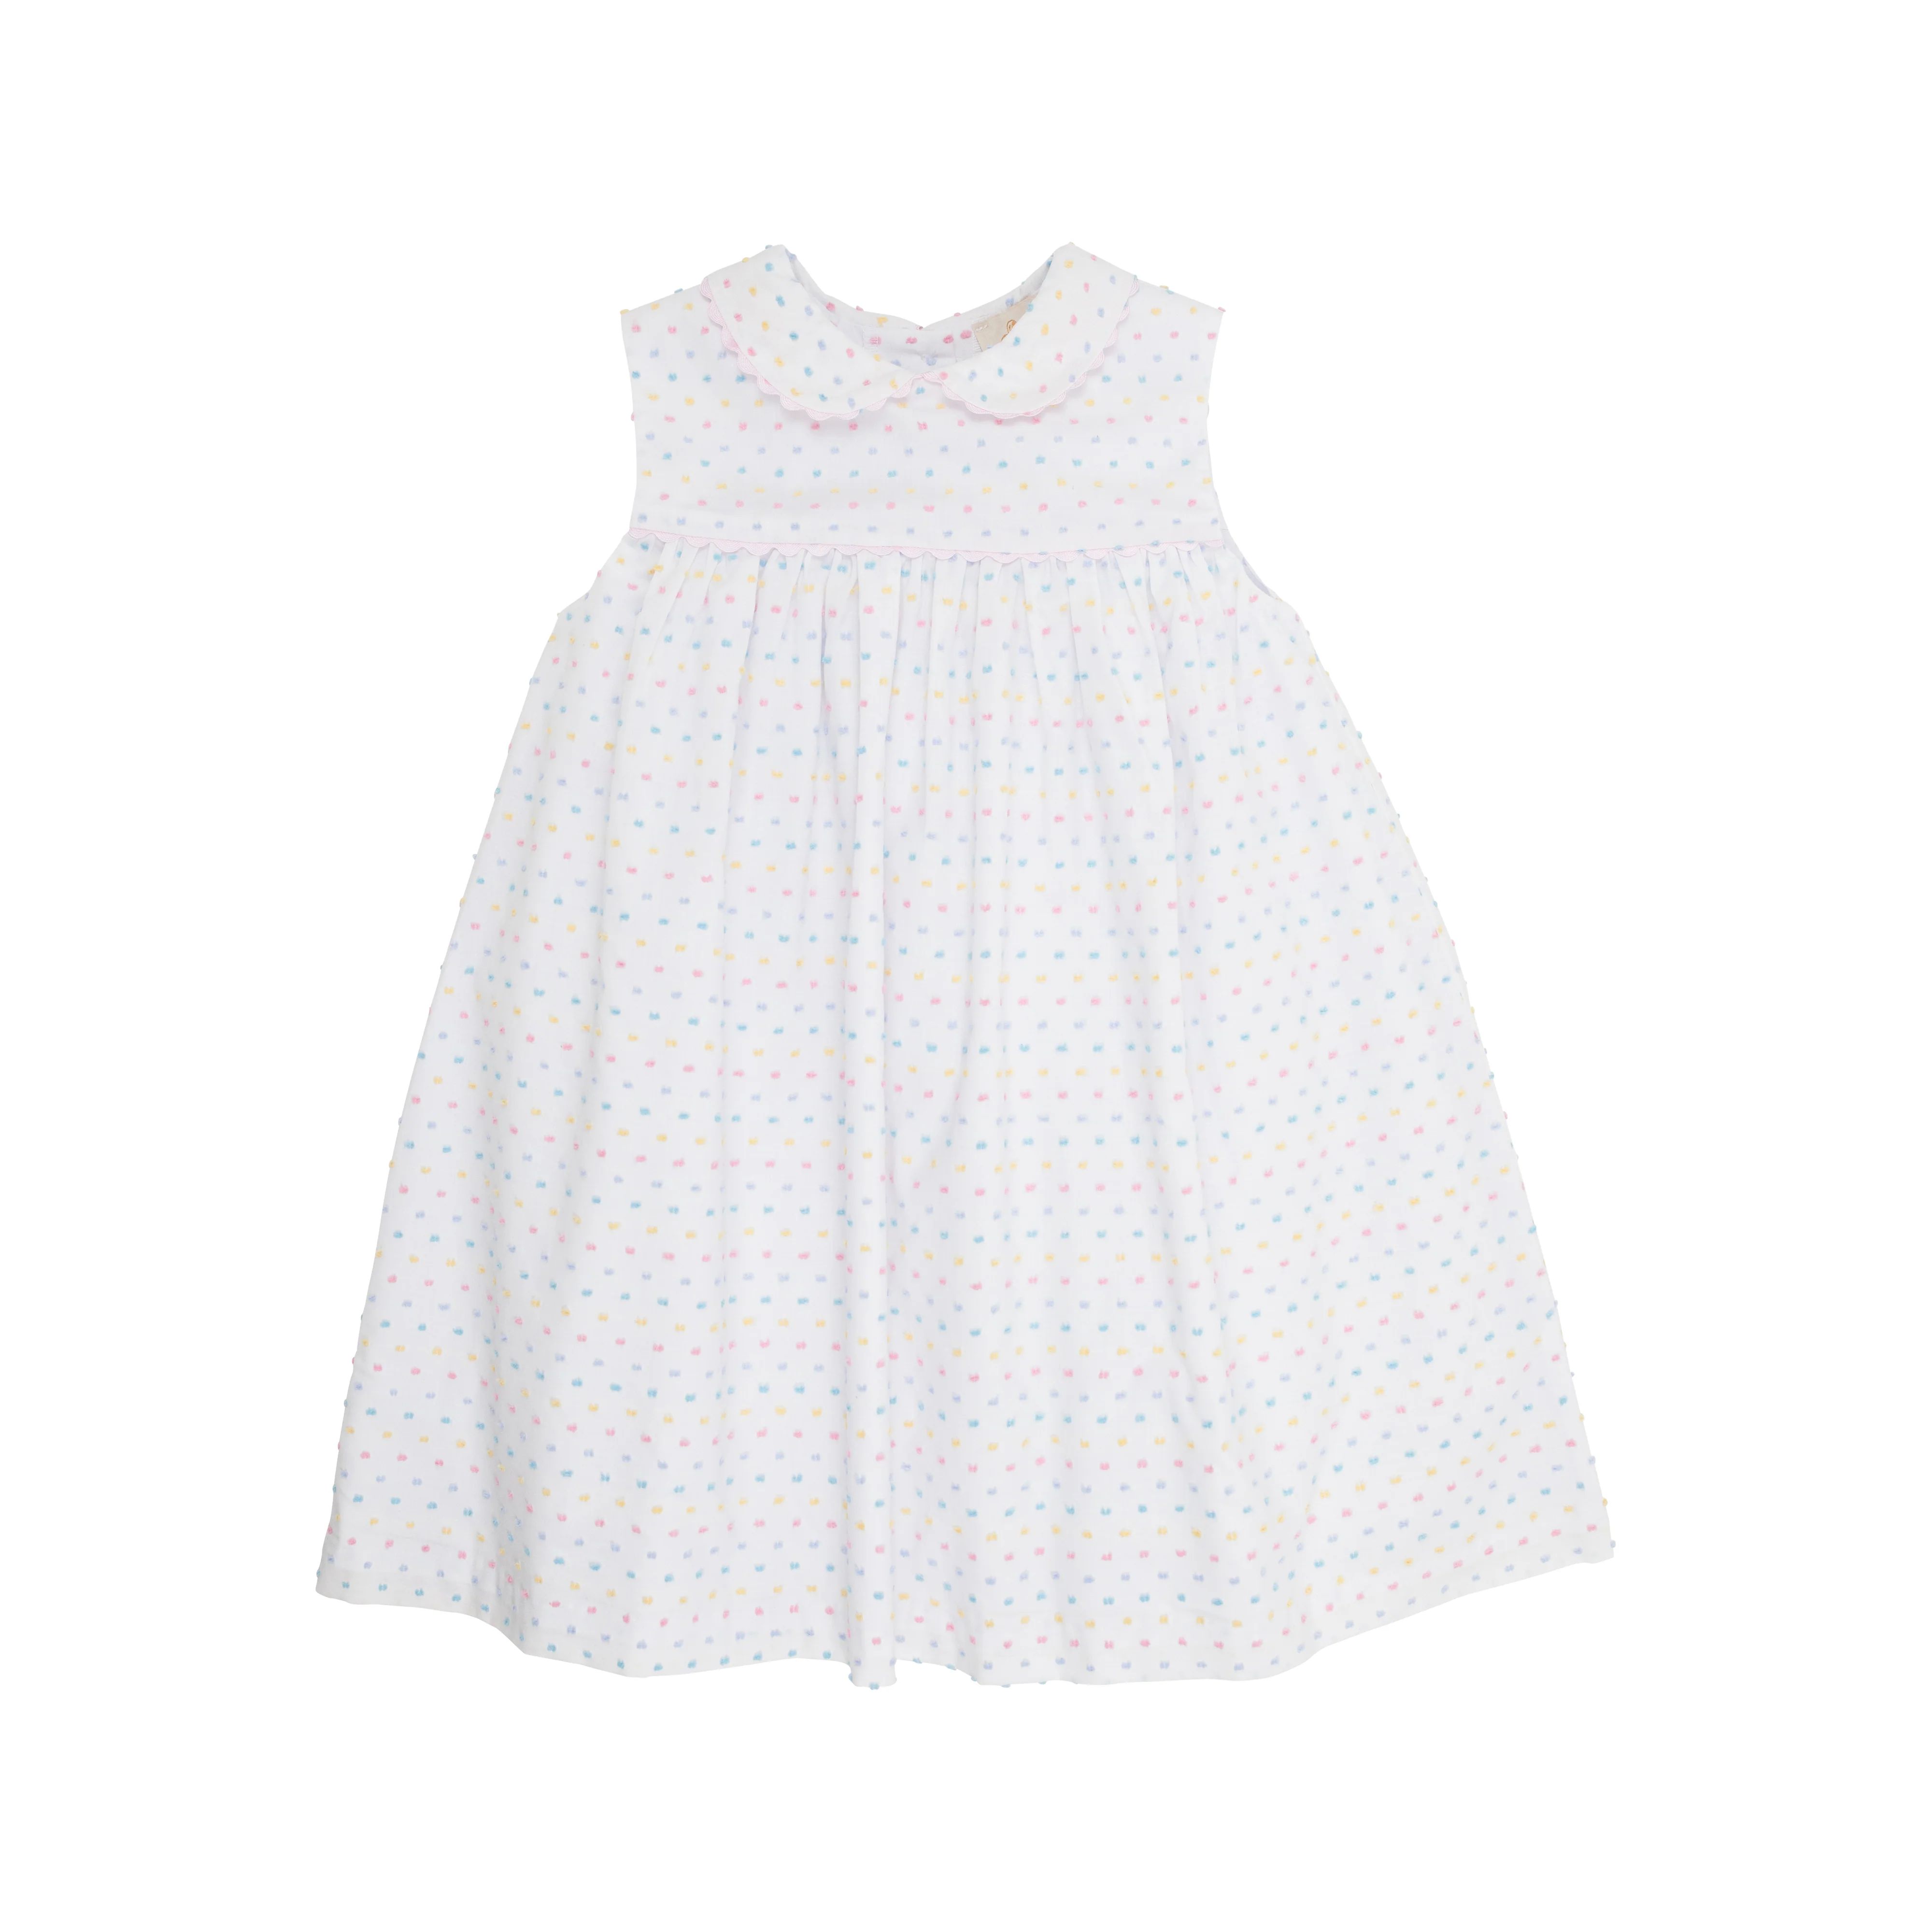 Sleeveless Mary Dal Dress - Worth Avenue White with Pastel Dallas Dot | The Beaufort Bonnet Company